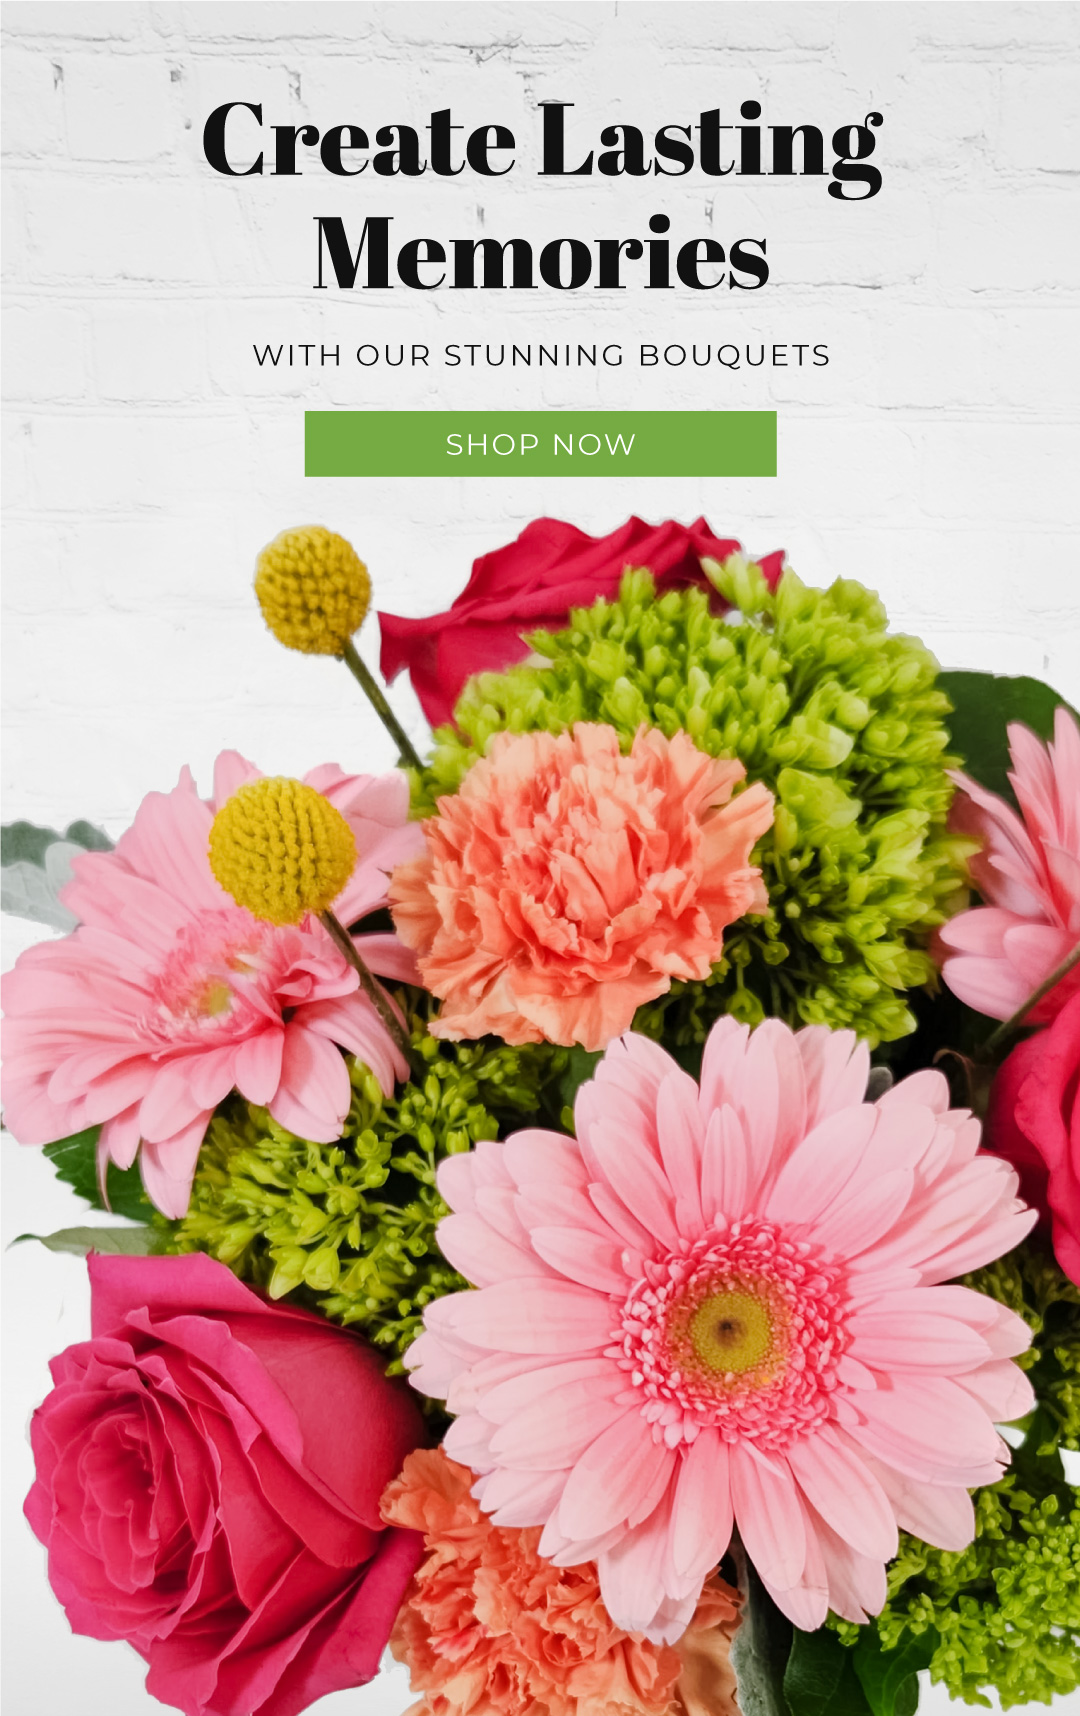 Make Lasting Memories with Flower Bouquet Delivery in Chicago